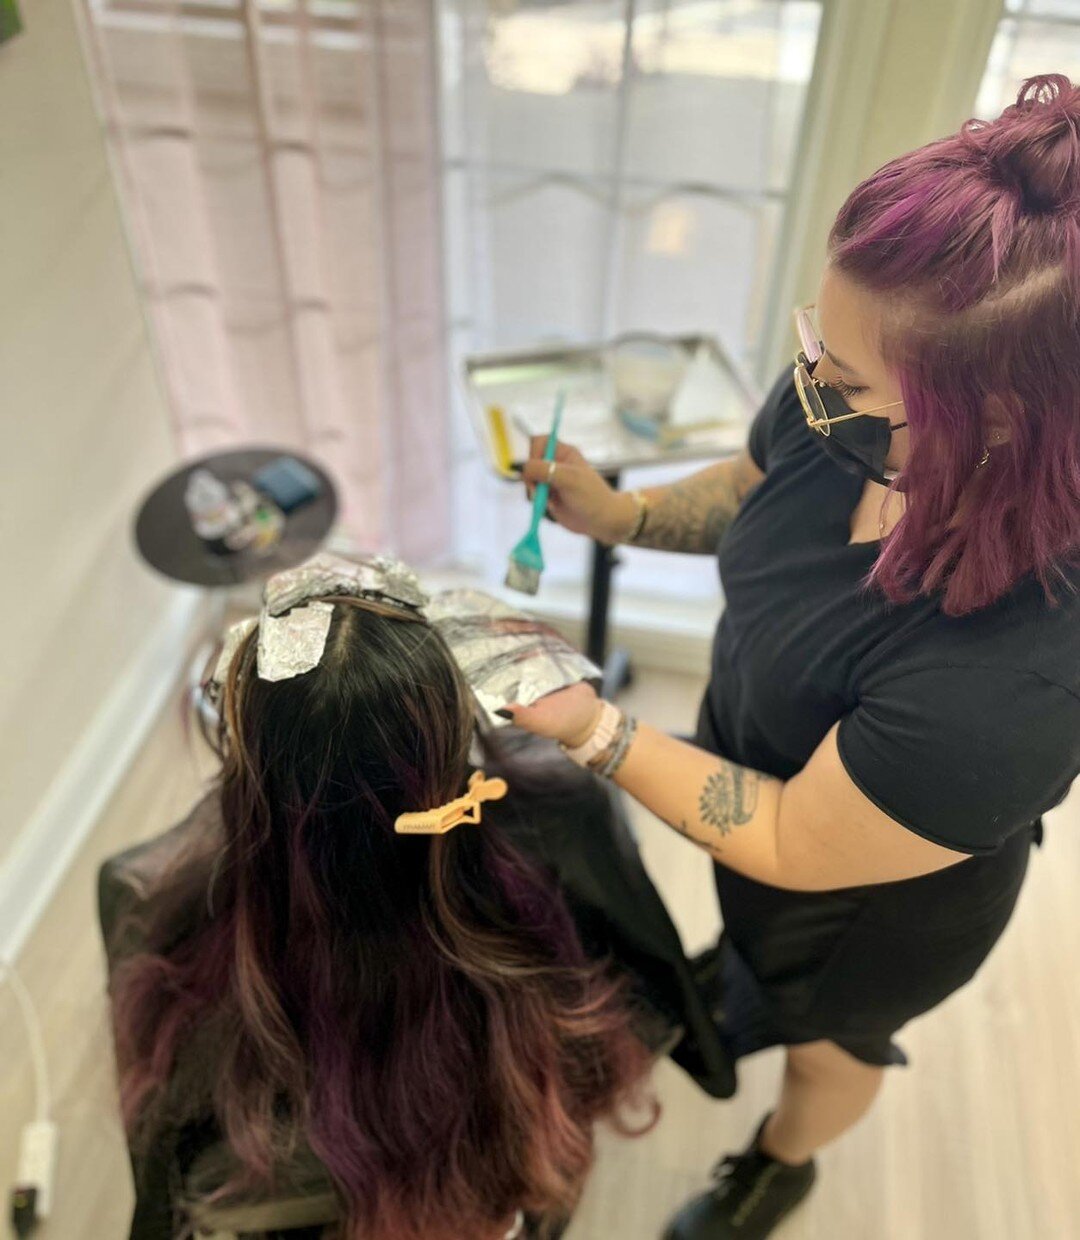 Another day, another fabulous balayage ✨ Book your appointment today&hellip; it&rsquo;s never too late to #lookgoodfeelgorgeous
#modesalon #arlingtontx #teammode #modehairsalon #teammodehair #mode #hairsalon #hairstylist #balayage #highlights #balaya